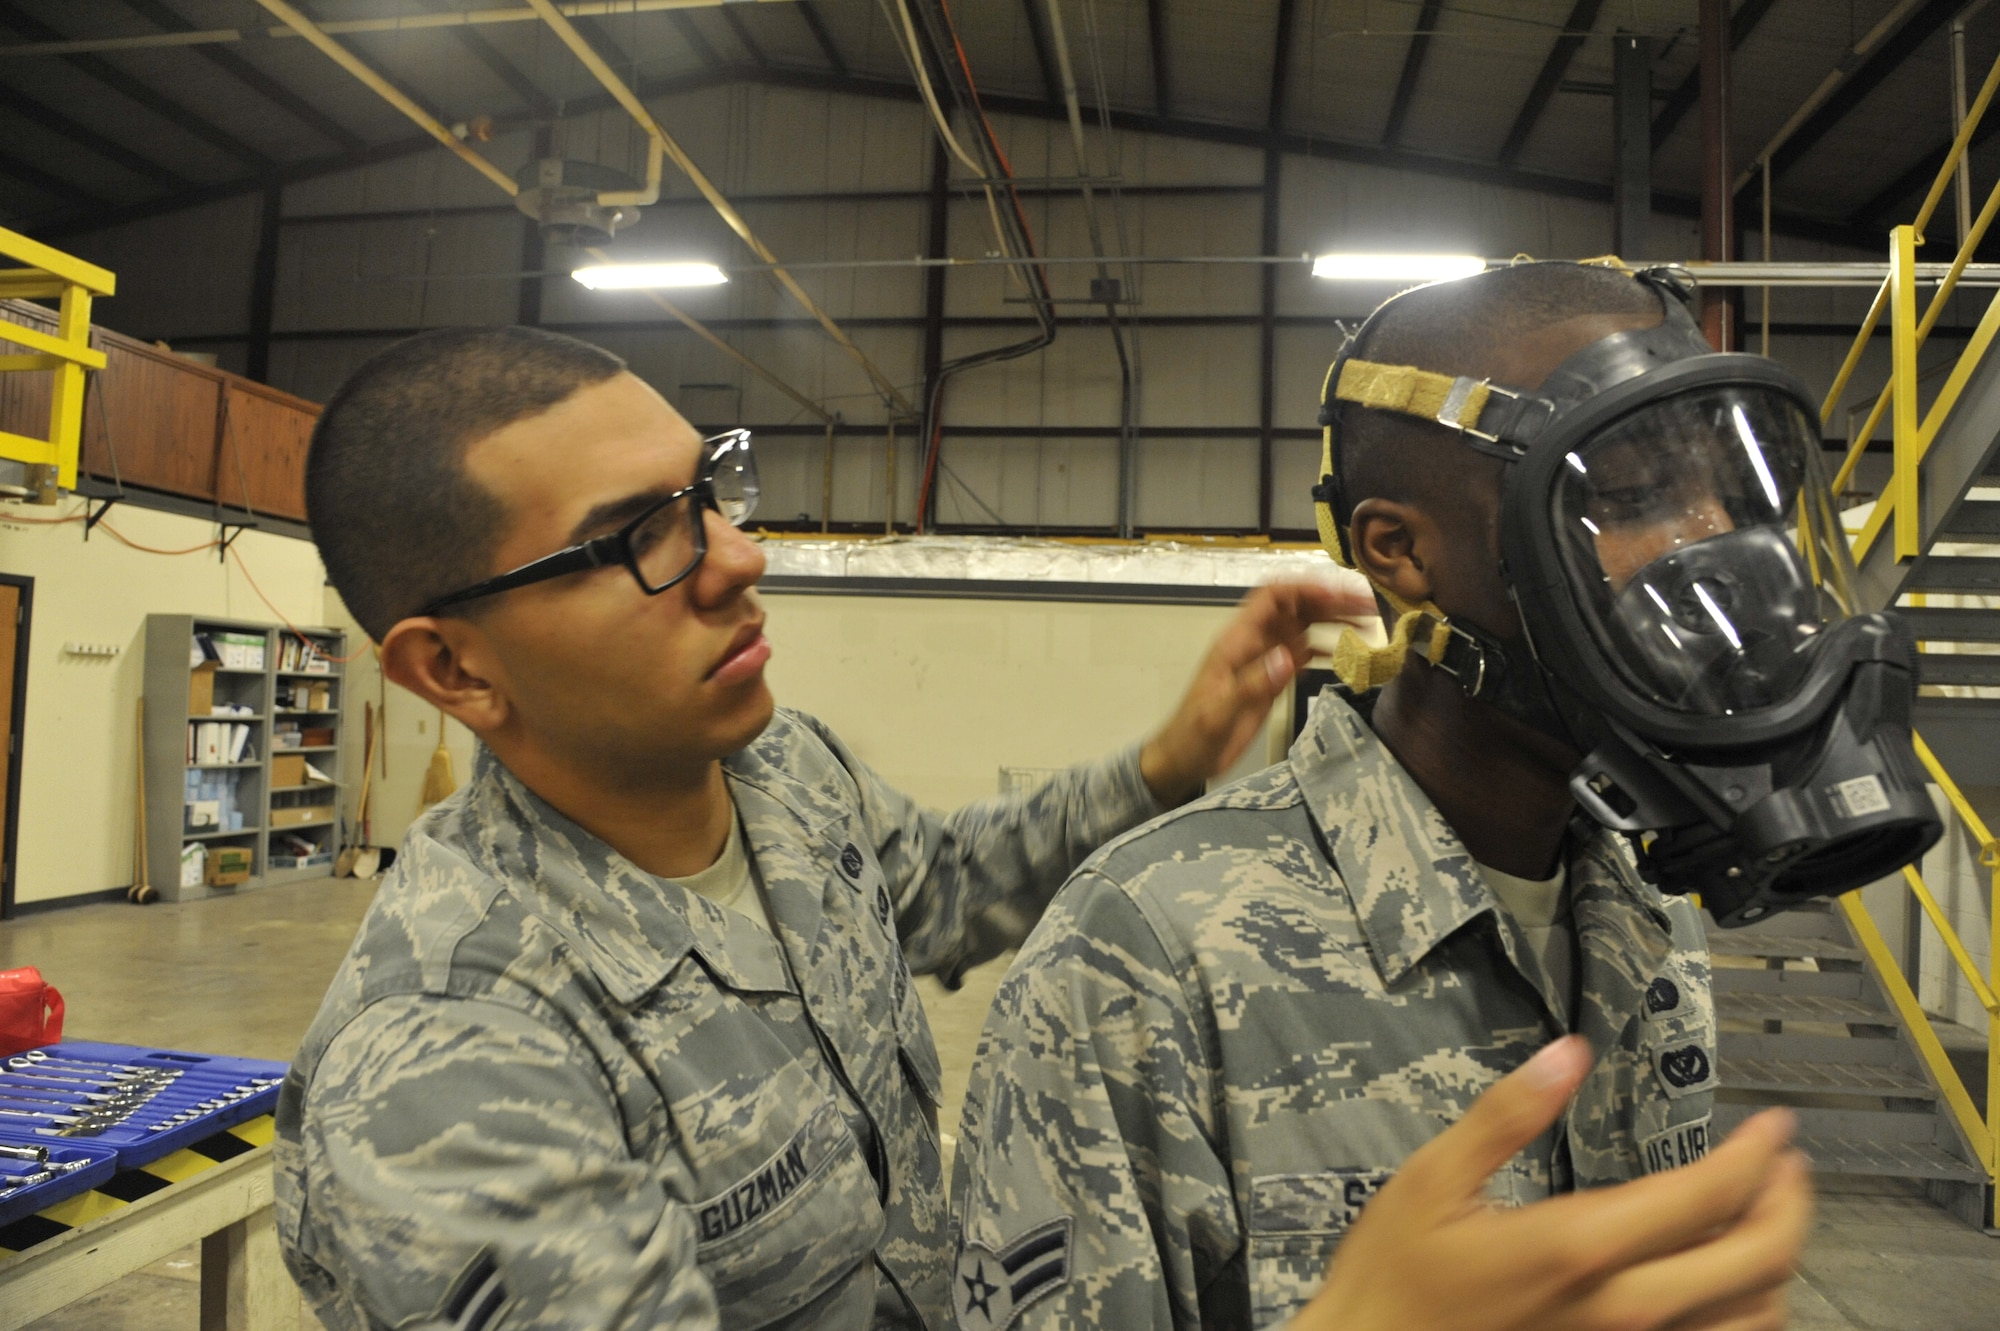 Airman 1st Class Alfredo Guzman, 509th Civil Engineer Squadron journeyman, assists Airman 1st Class Brandon Stone, 509th CES apprentice, with donning a FireHawk M7 mask at Whiteman Air Force Base, Mo., May 22, 2013. The mask is a self-contained breathing apparatus used to prevent any inhalation of chemicals or biological hazards. (U.S. Air Force photo by Airman 1st Class Keenan Berry/Released)